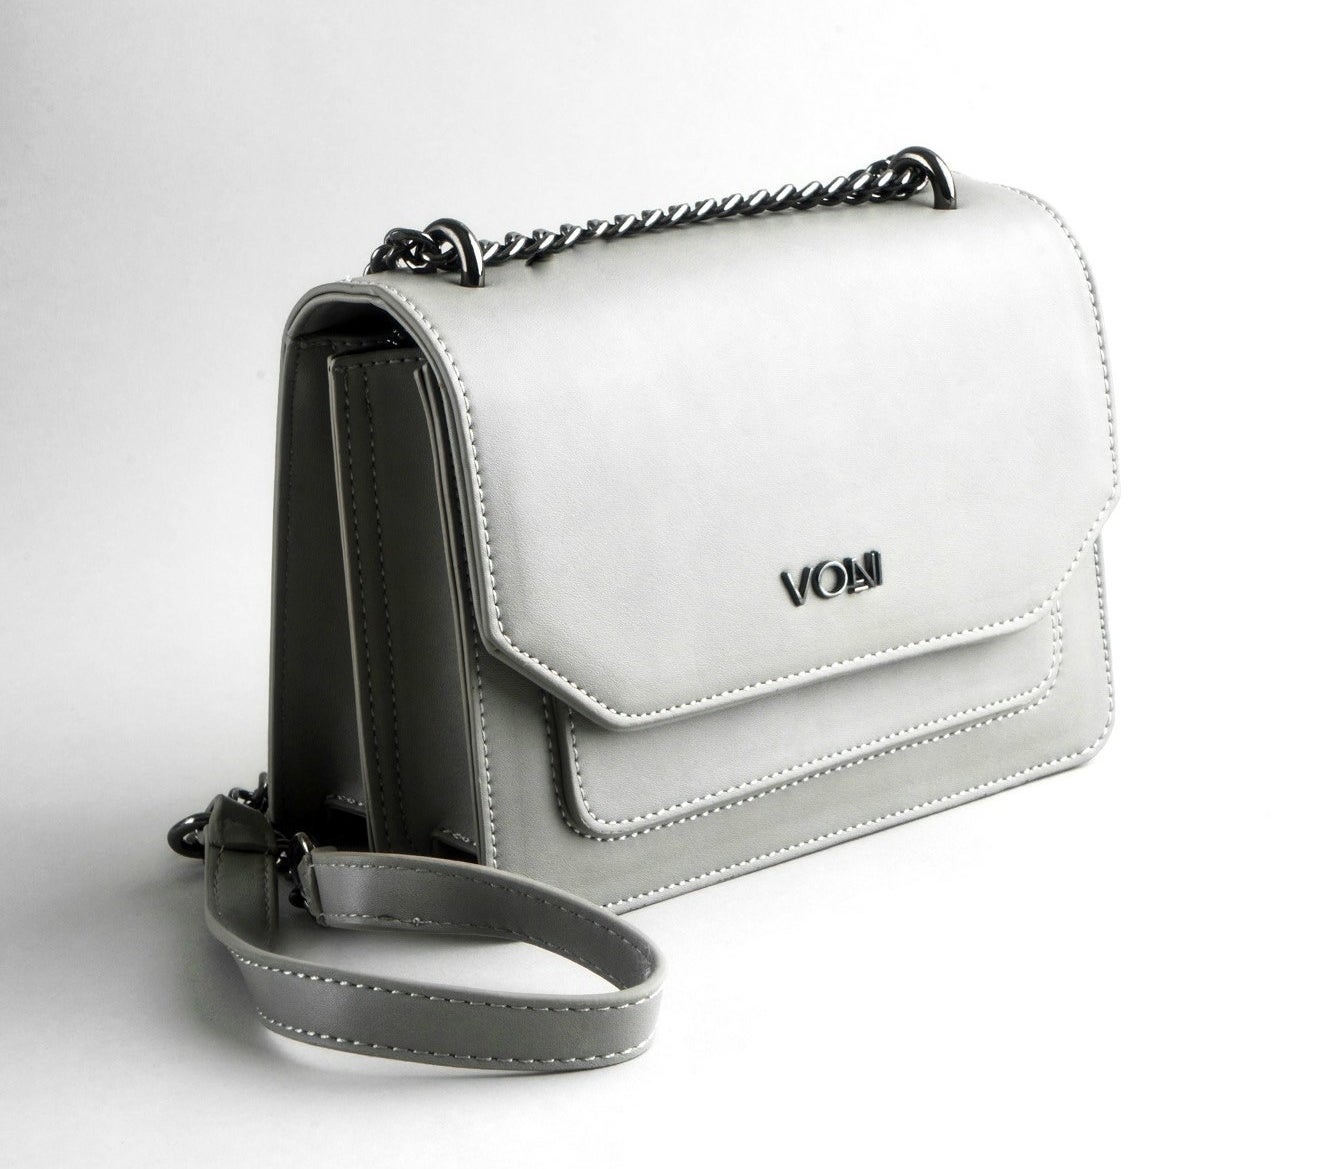 The rectangle-shaped handbag with a silver metal chain strap with a soft part in the center and a front flap, two inner compartments, and front-slip pocket in grey